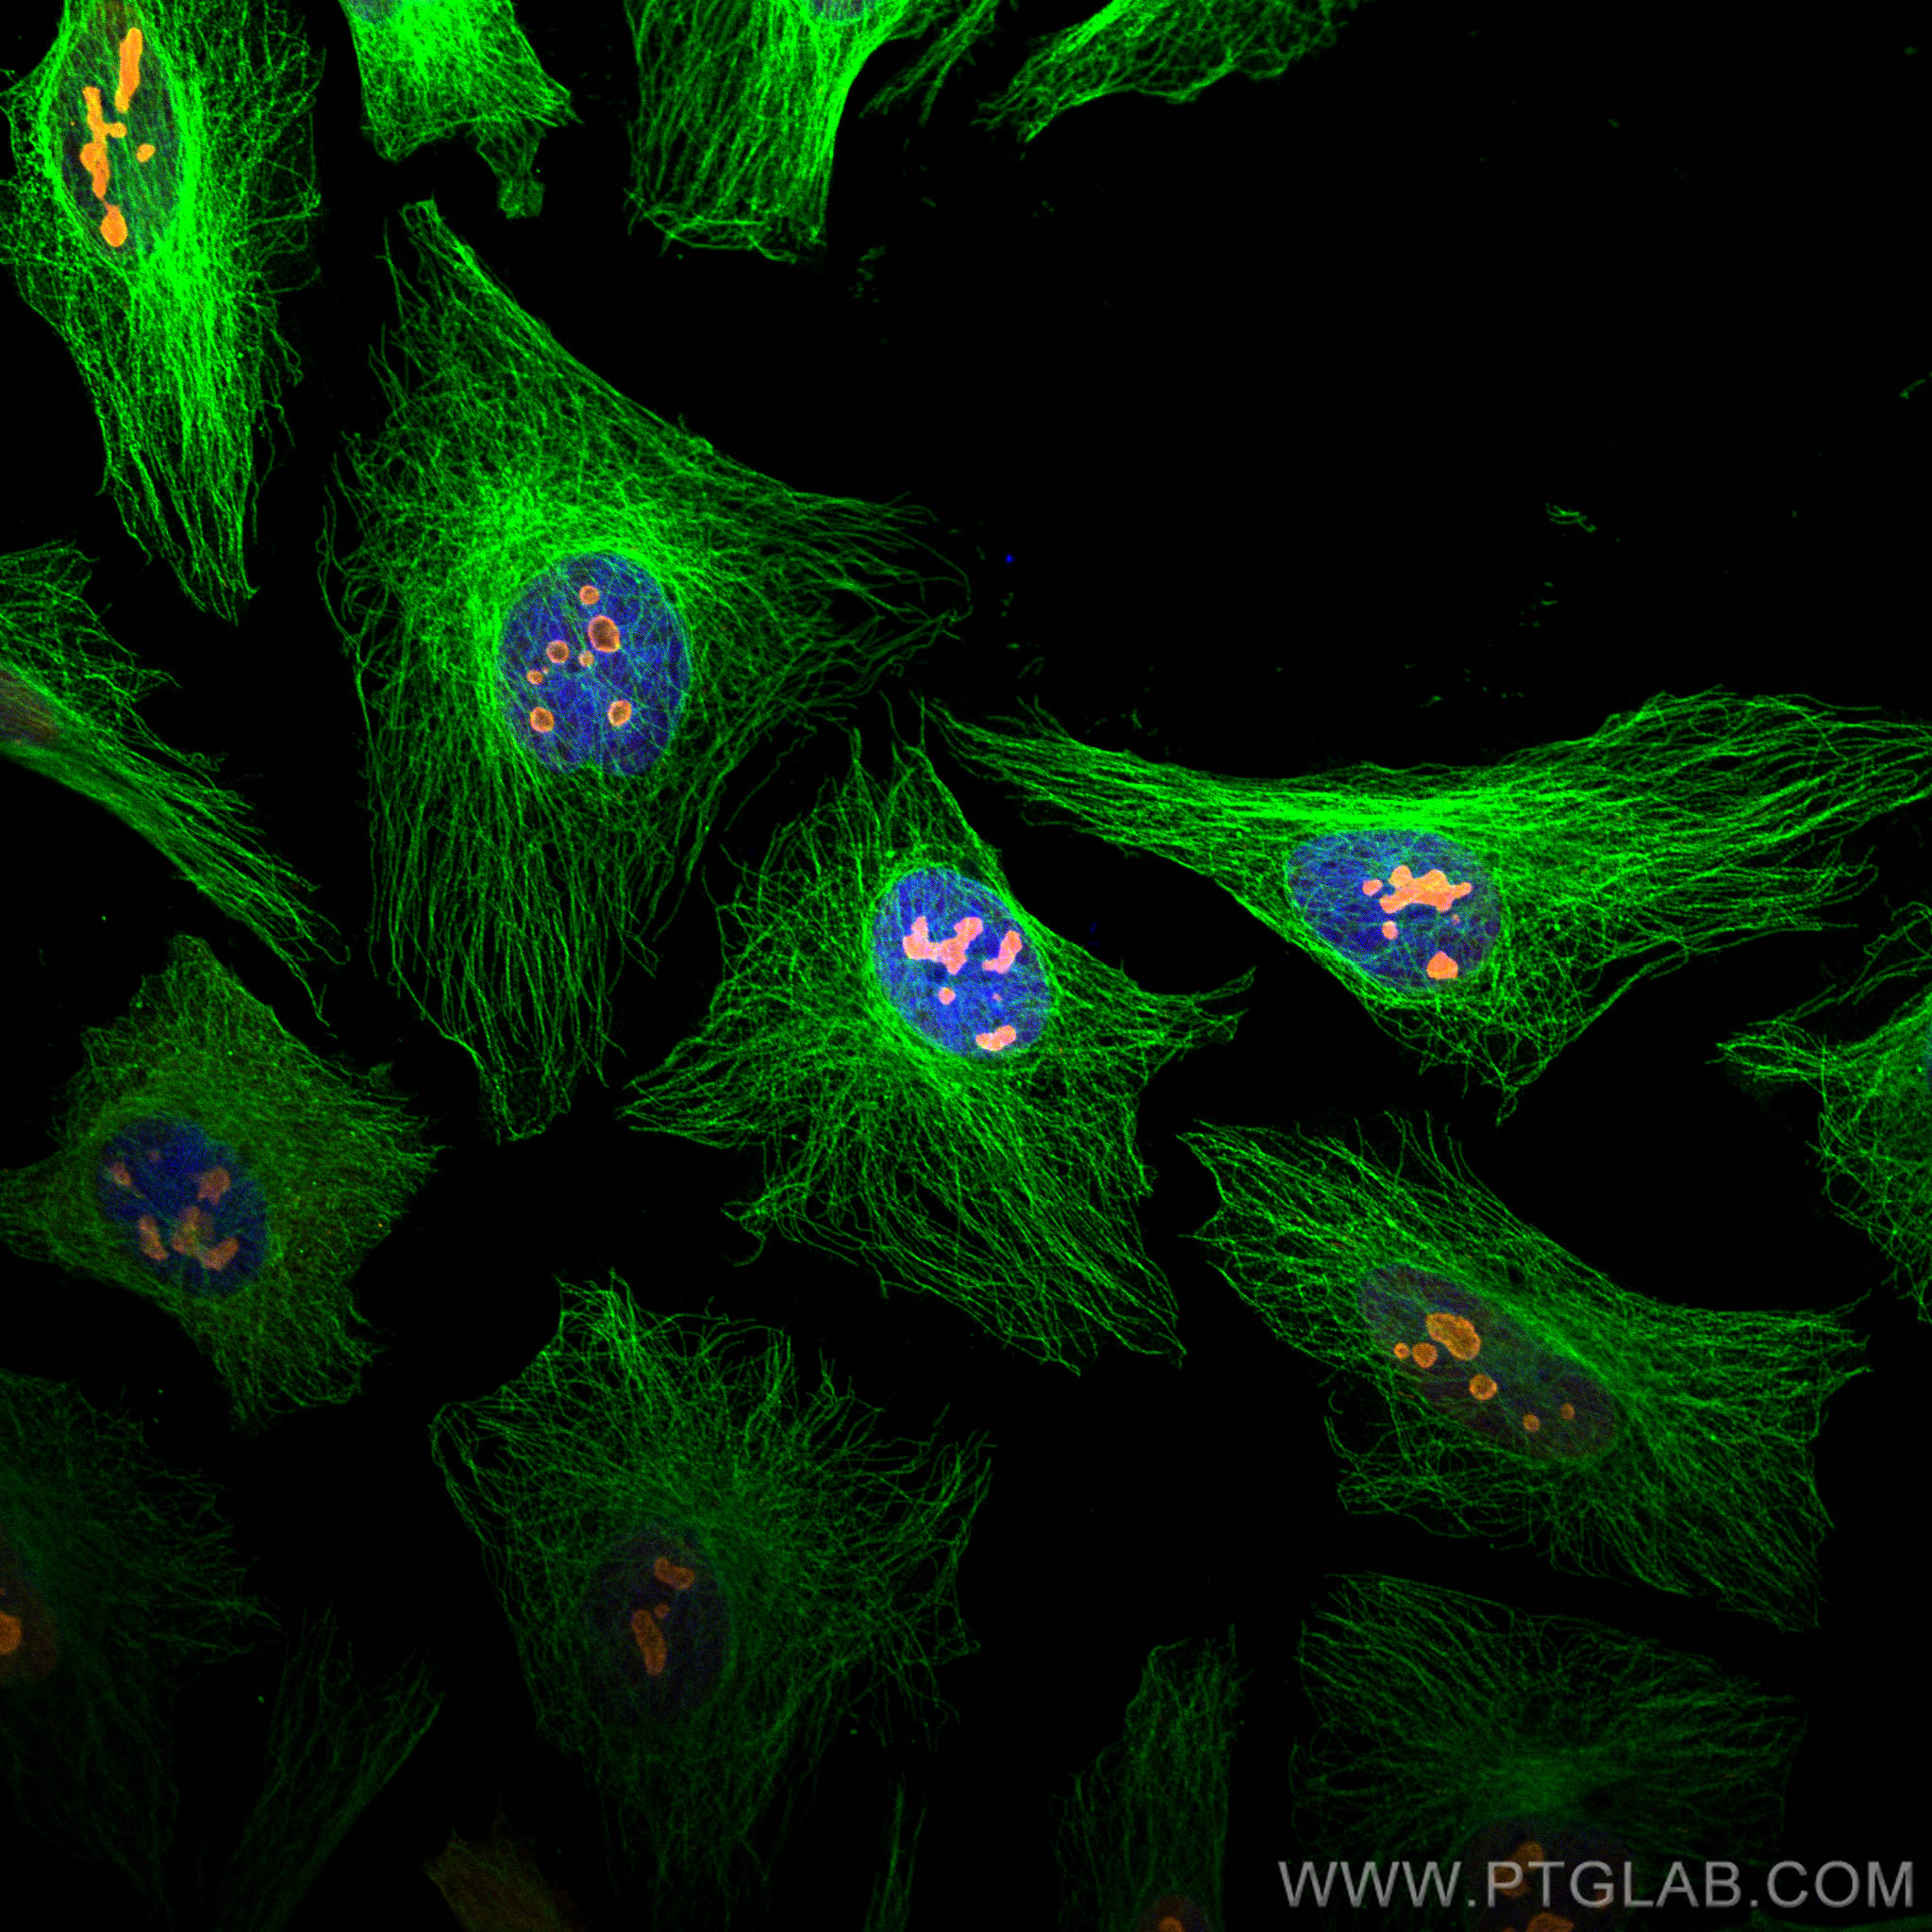 Immunofluorescence of Hela cells: Hela cells were fixed with 4% PFA and stained with Rabbit anti-Alpha Tubulin polyclonal antibody (11224-1-AP, 1:200, green) and mouse anti-NPM1 monoclonal antibody (60096-1-Ig, 1:1000, orange). Multi-rAb CoraLite® Plus 488-Goat Anti-Rabbit Recombinant Secondary Antibody (H+L) (RGAR002, 1:500) and Multi-rAb CoraLite® Plus 555-Goat Anti-Mouse Recombinant Secondary Antibody (H+L) (RGAM003, 1:500) were used for detection. 